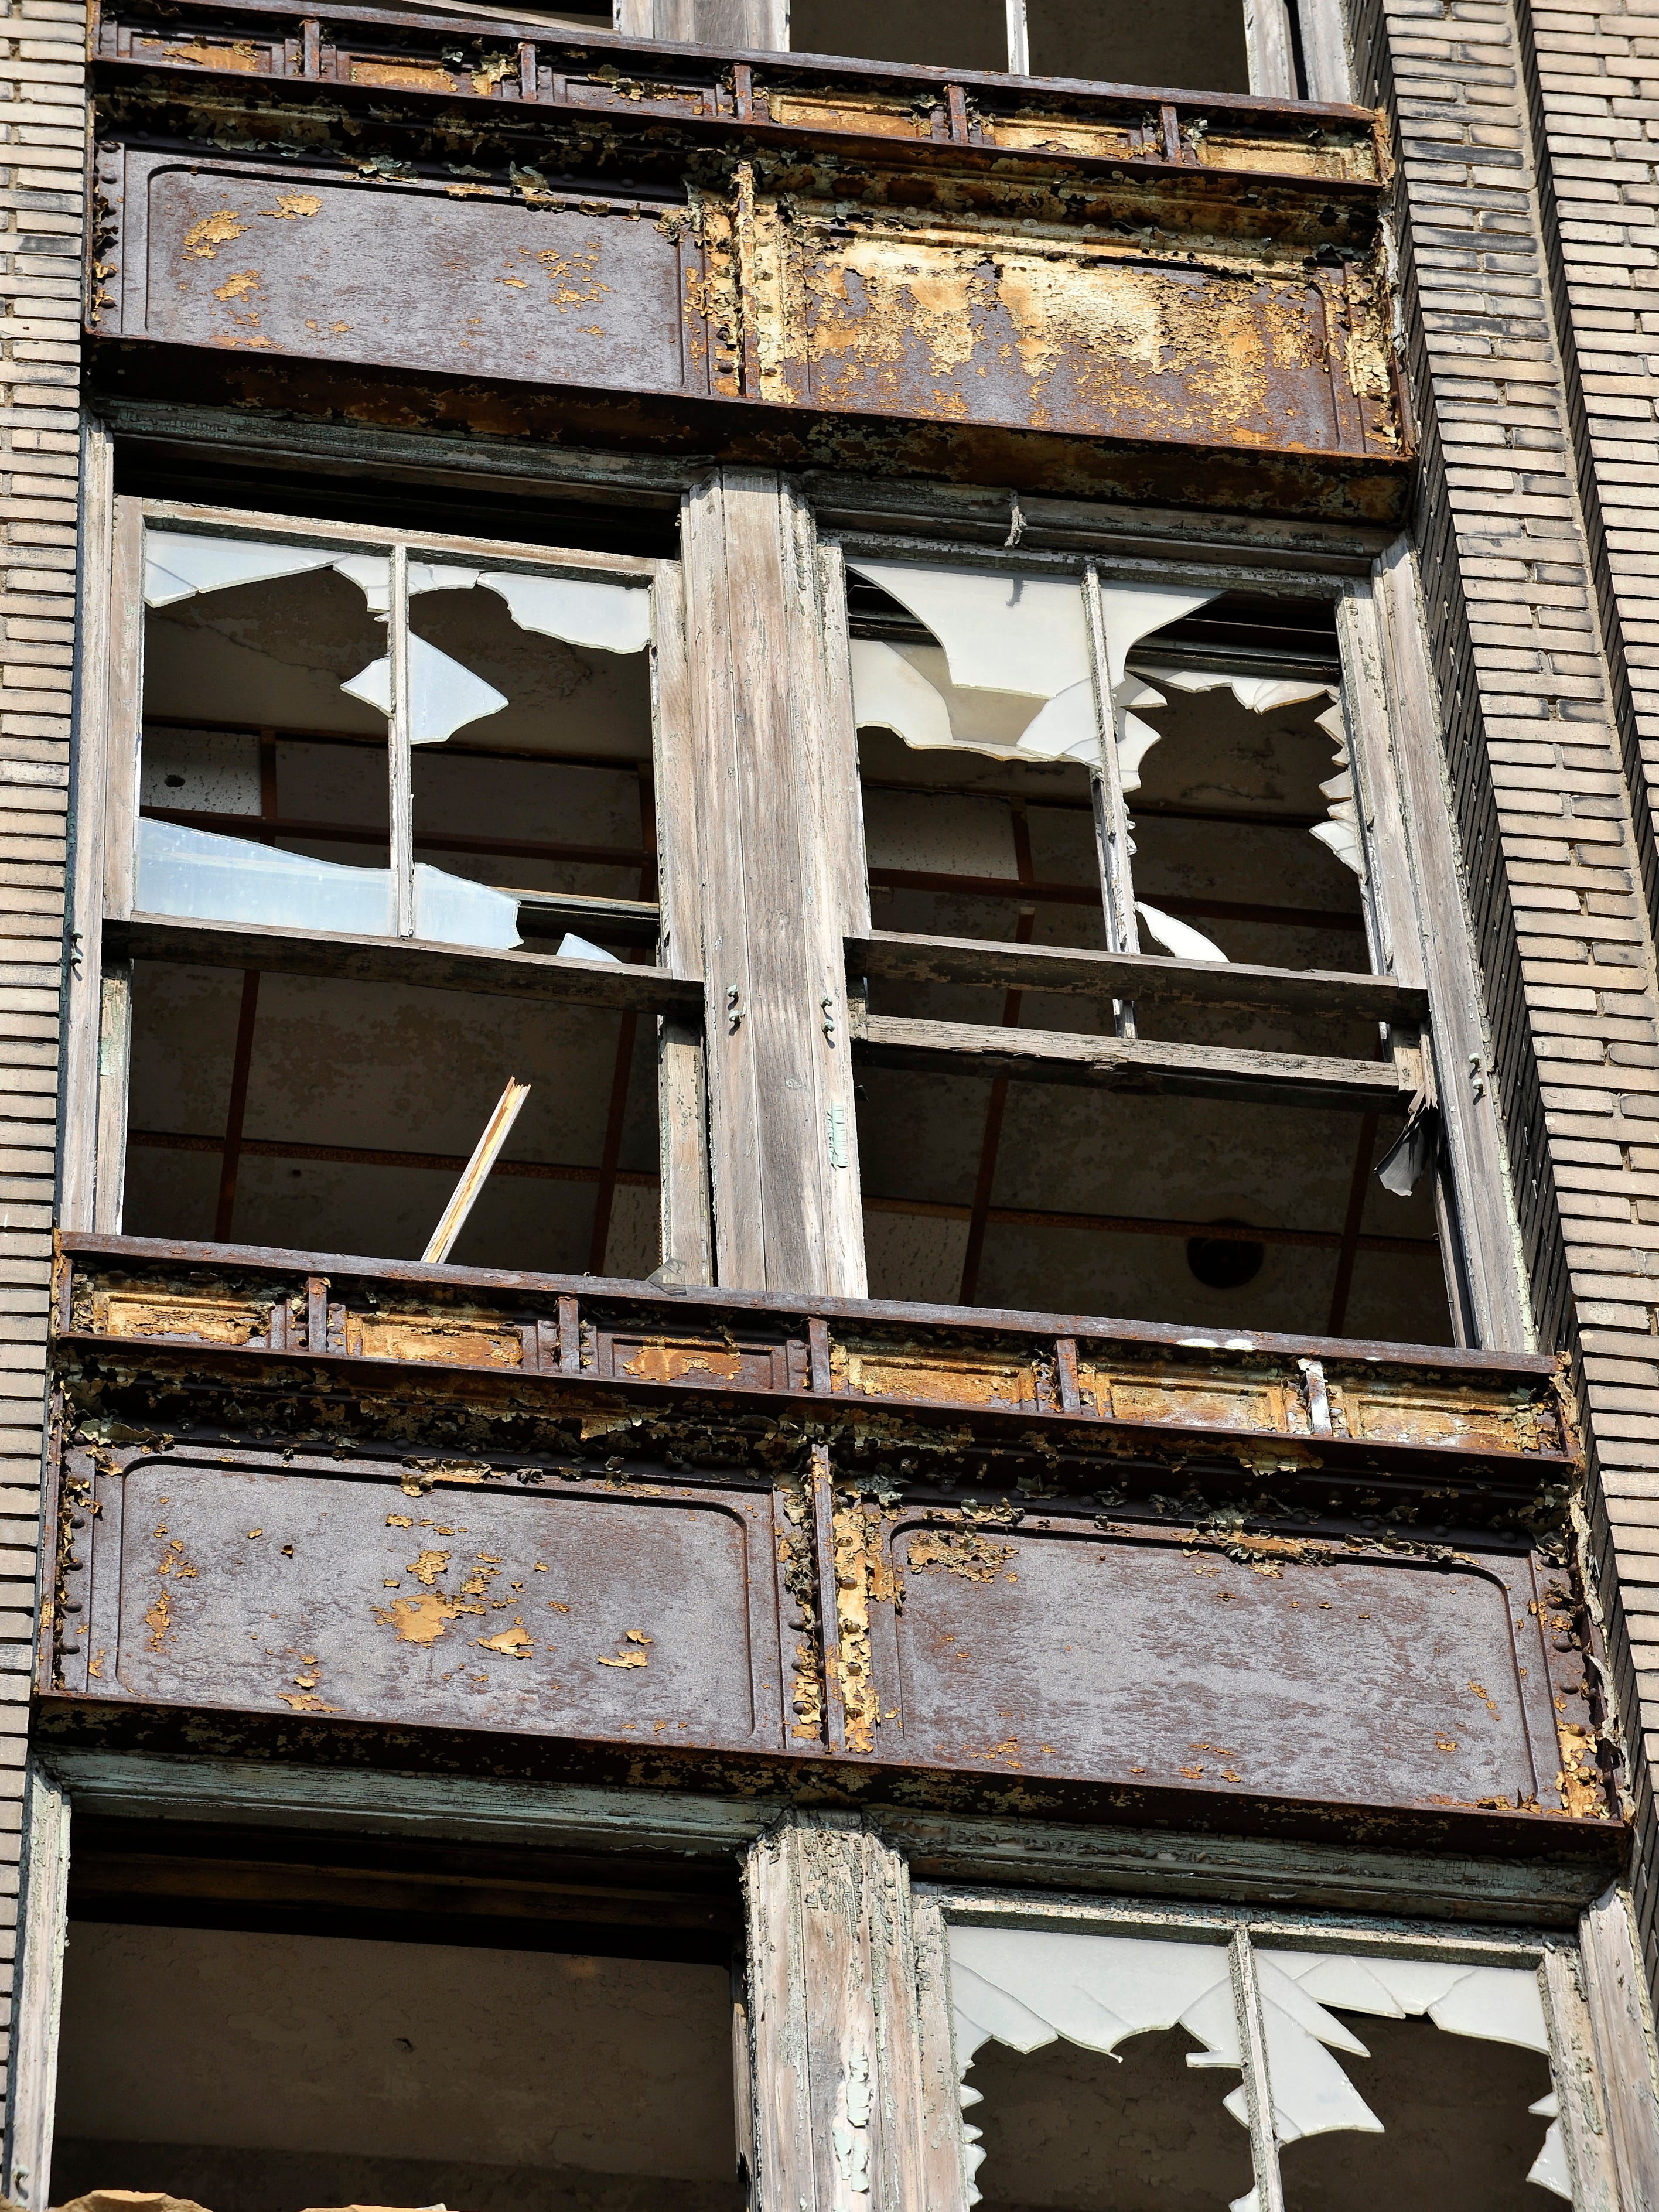 Broken windows are a common sight at the  old train station in 2011.